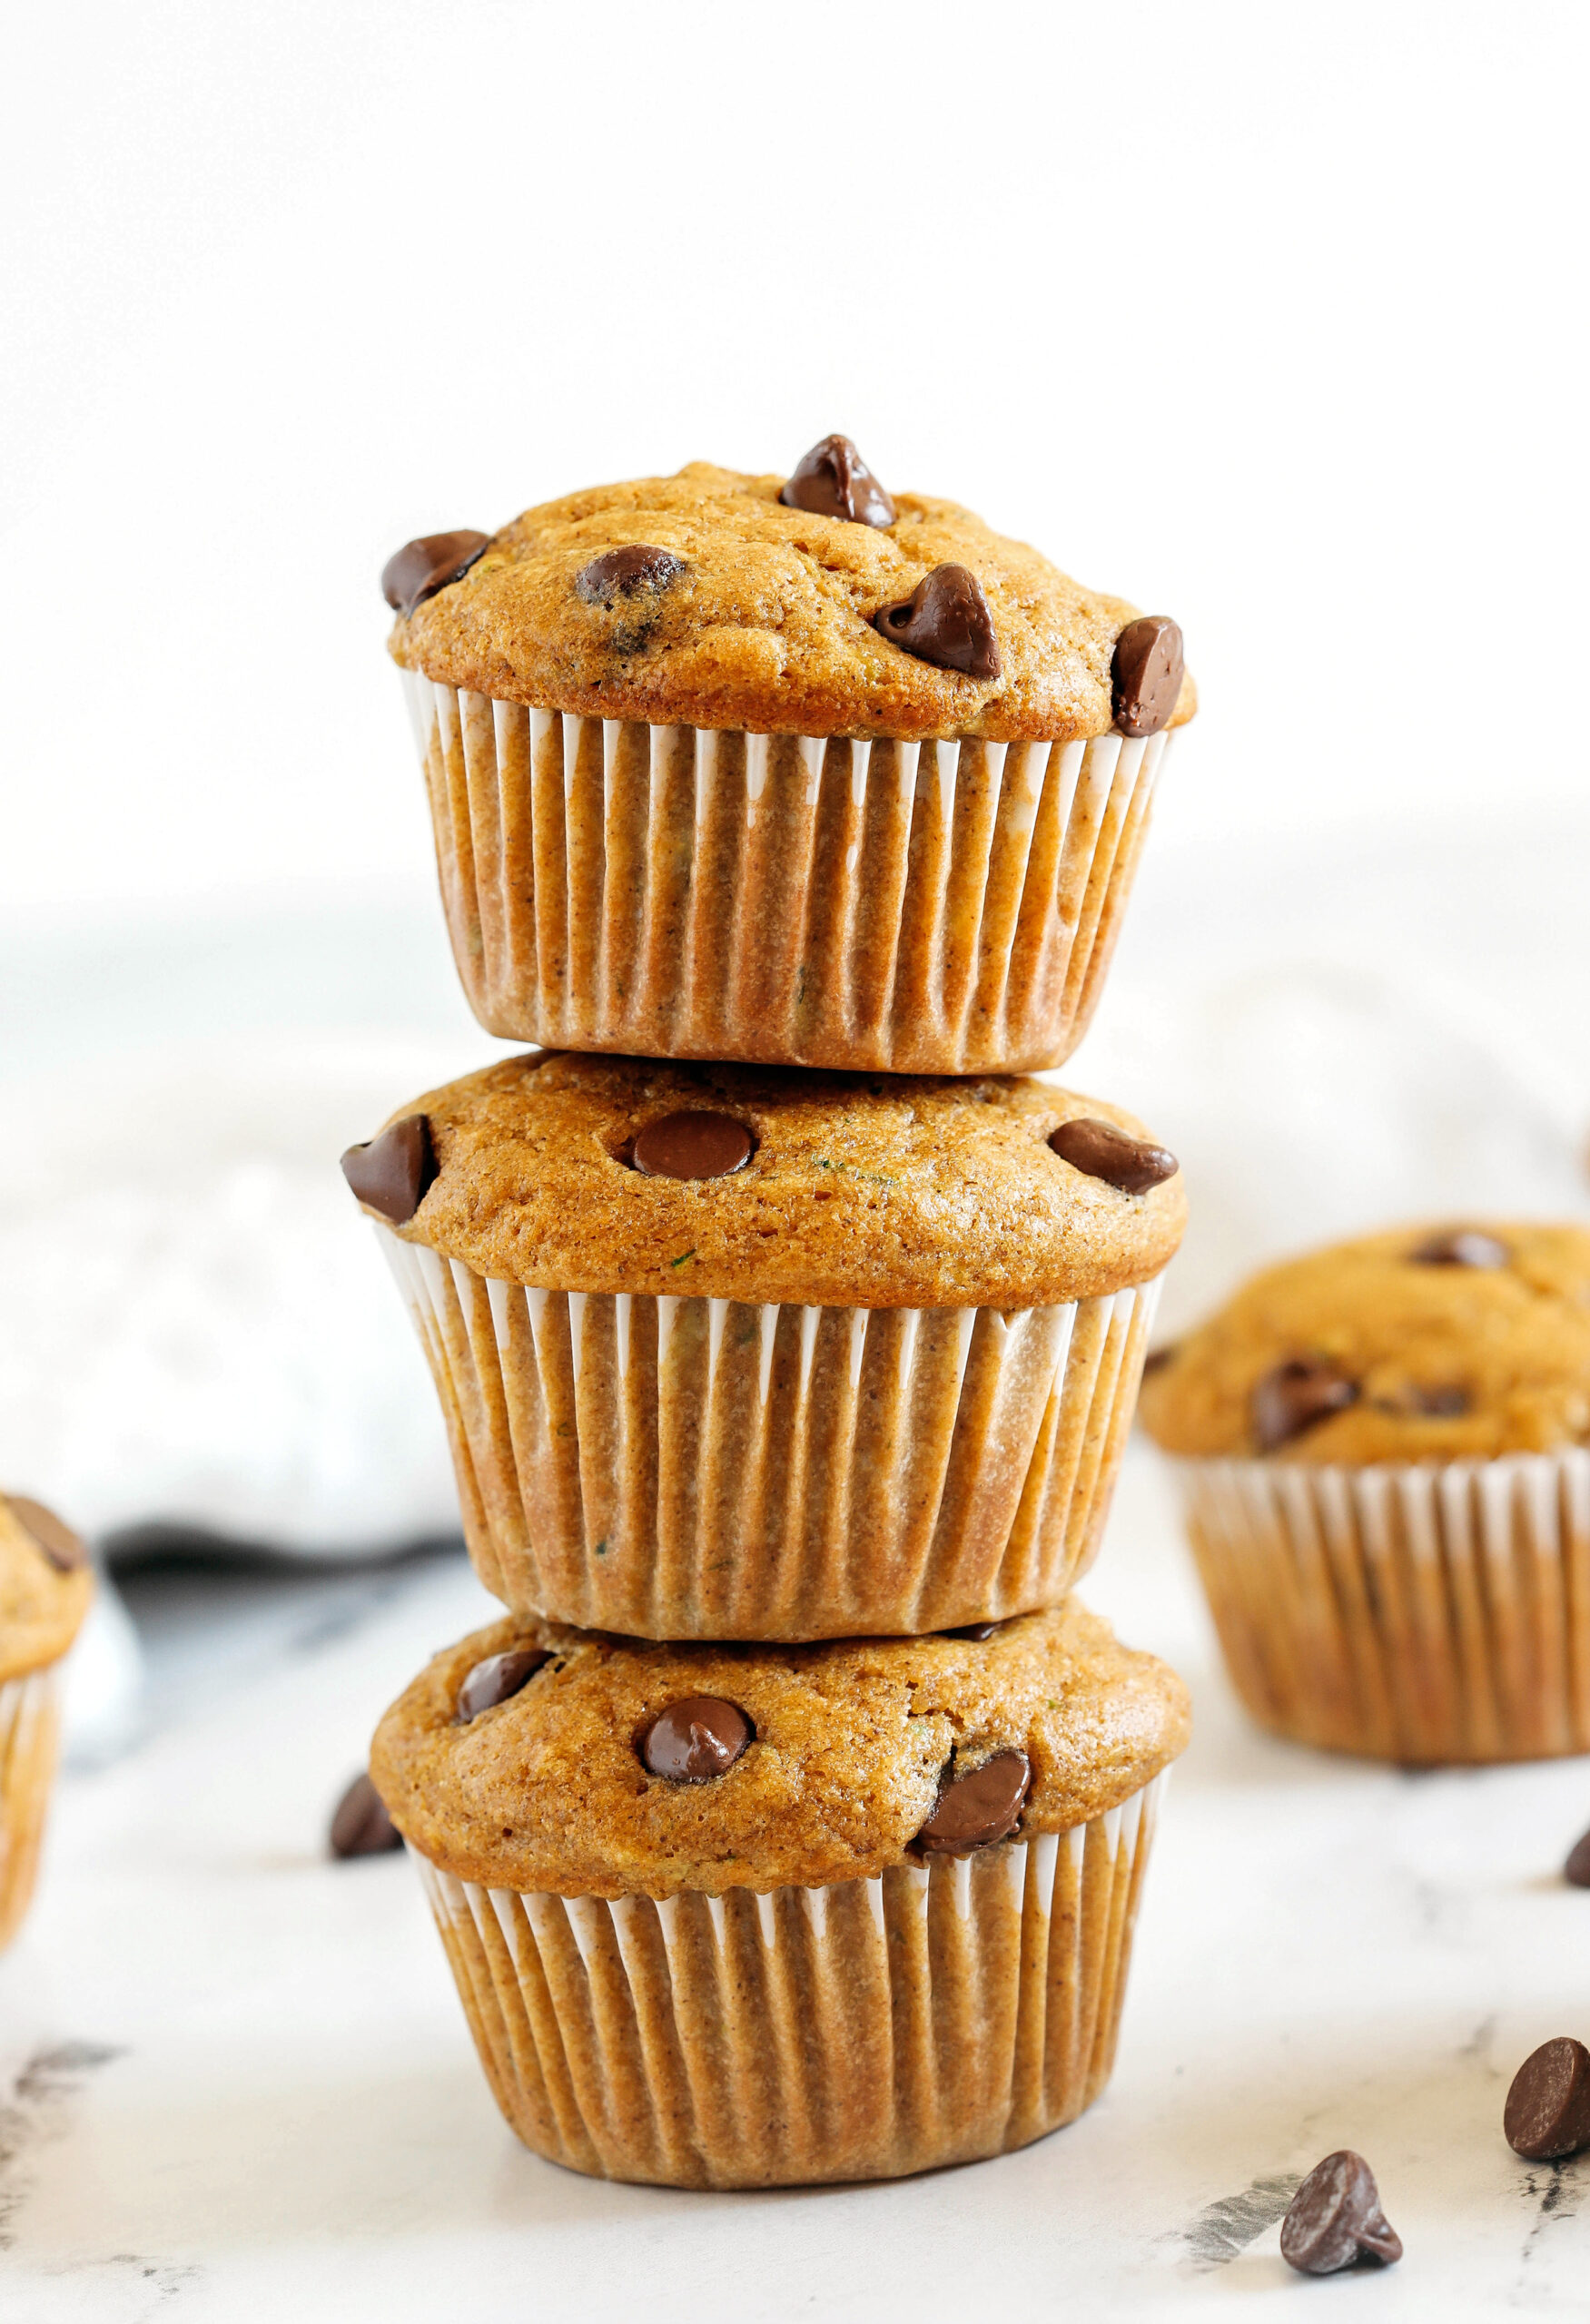 These Chocolate Chip Zucchini Muffins are moist, fluffy, and made healthier with whole wheat flour, Greek yogurt, shredded zucchini and zero butter or refined sugar.  Loaded with warm flavors and chunks of chocolate in every bite!